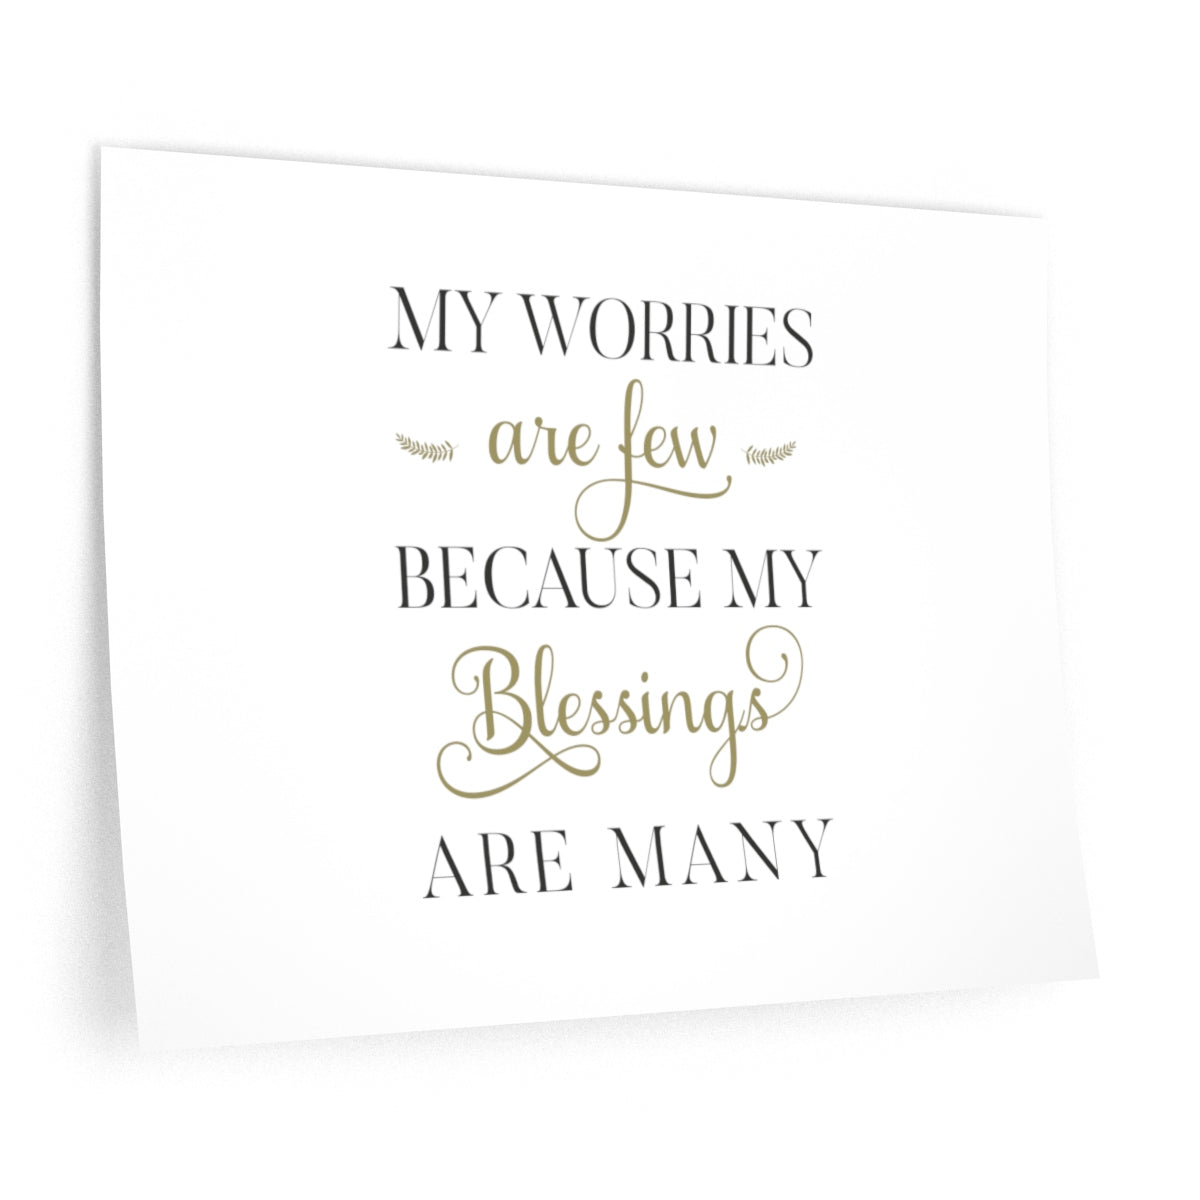 My Worries Are Few Because My Blessings Are Many Wall Decal - Inspired By Savy